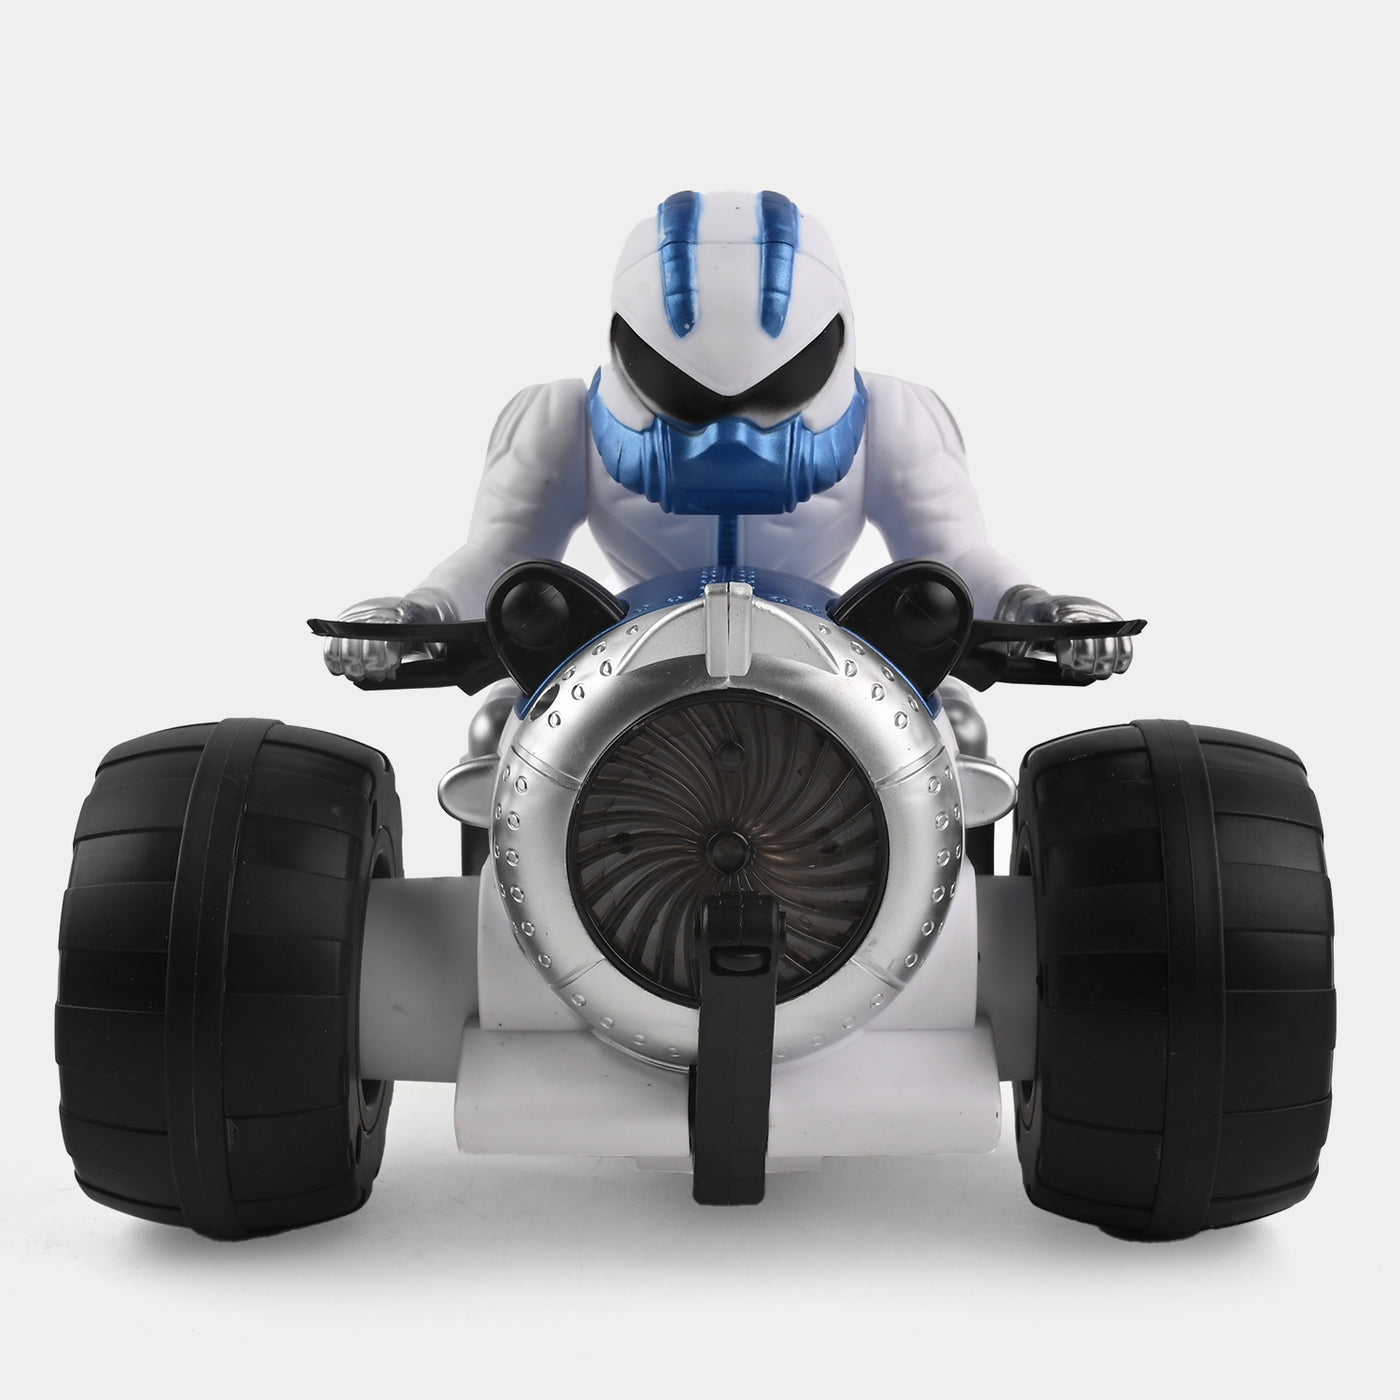 Stunt Spin Motorcycle Toy For Kids